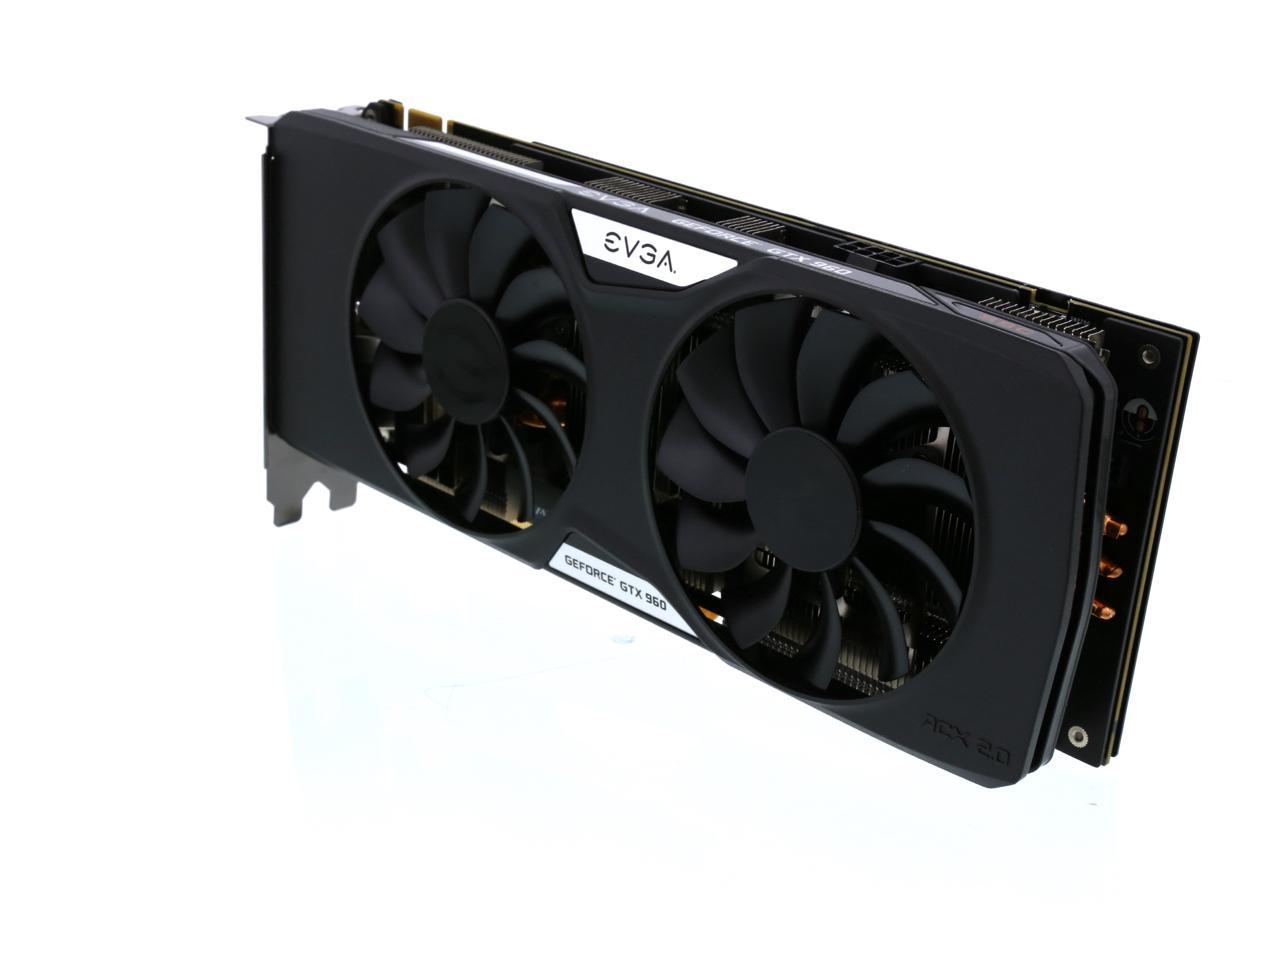 Evga Geforce Gtx 960 04g P4 3967 Kr 4gb Ssc Gaming W Acx 2 0 Whisper Silent Cooling W Free Installed Backplate Graphics Card Newegg Com